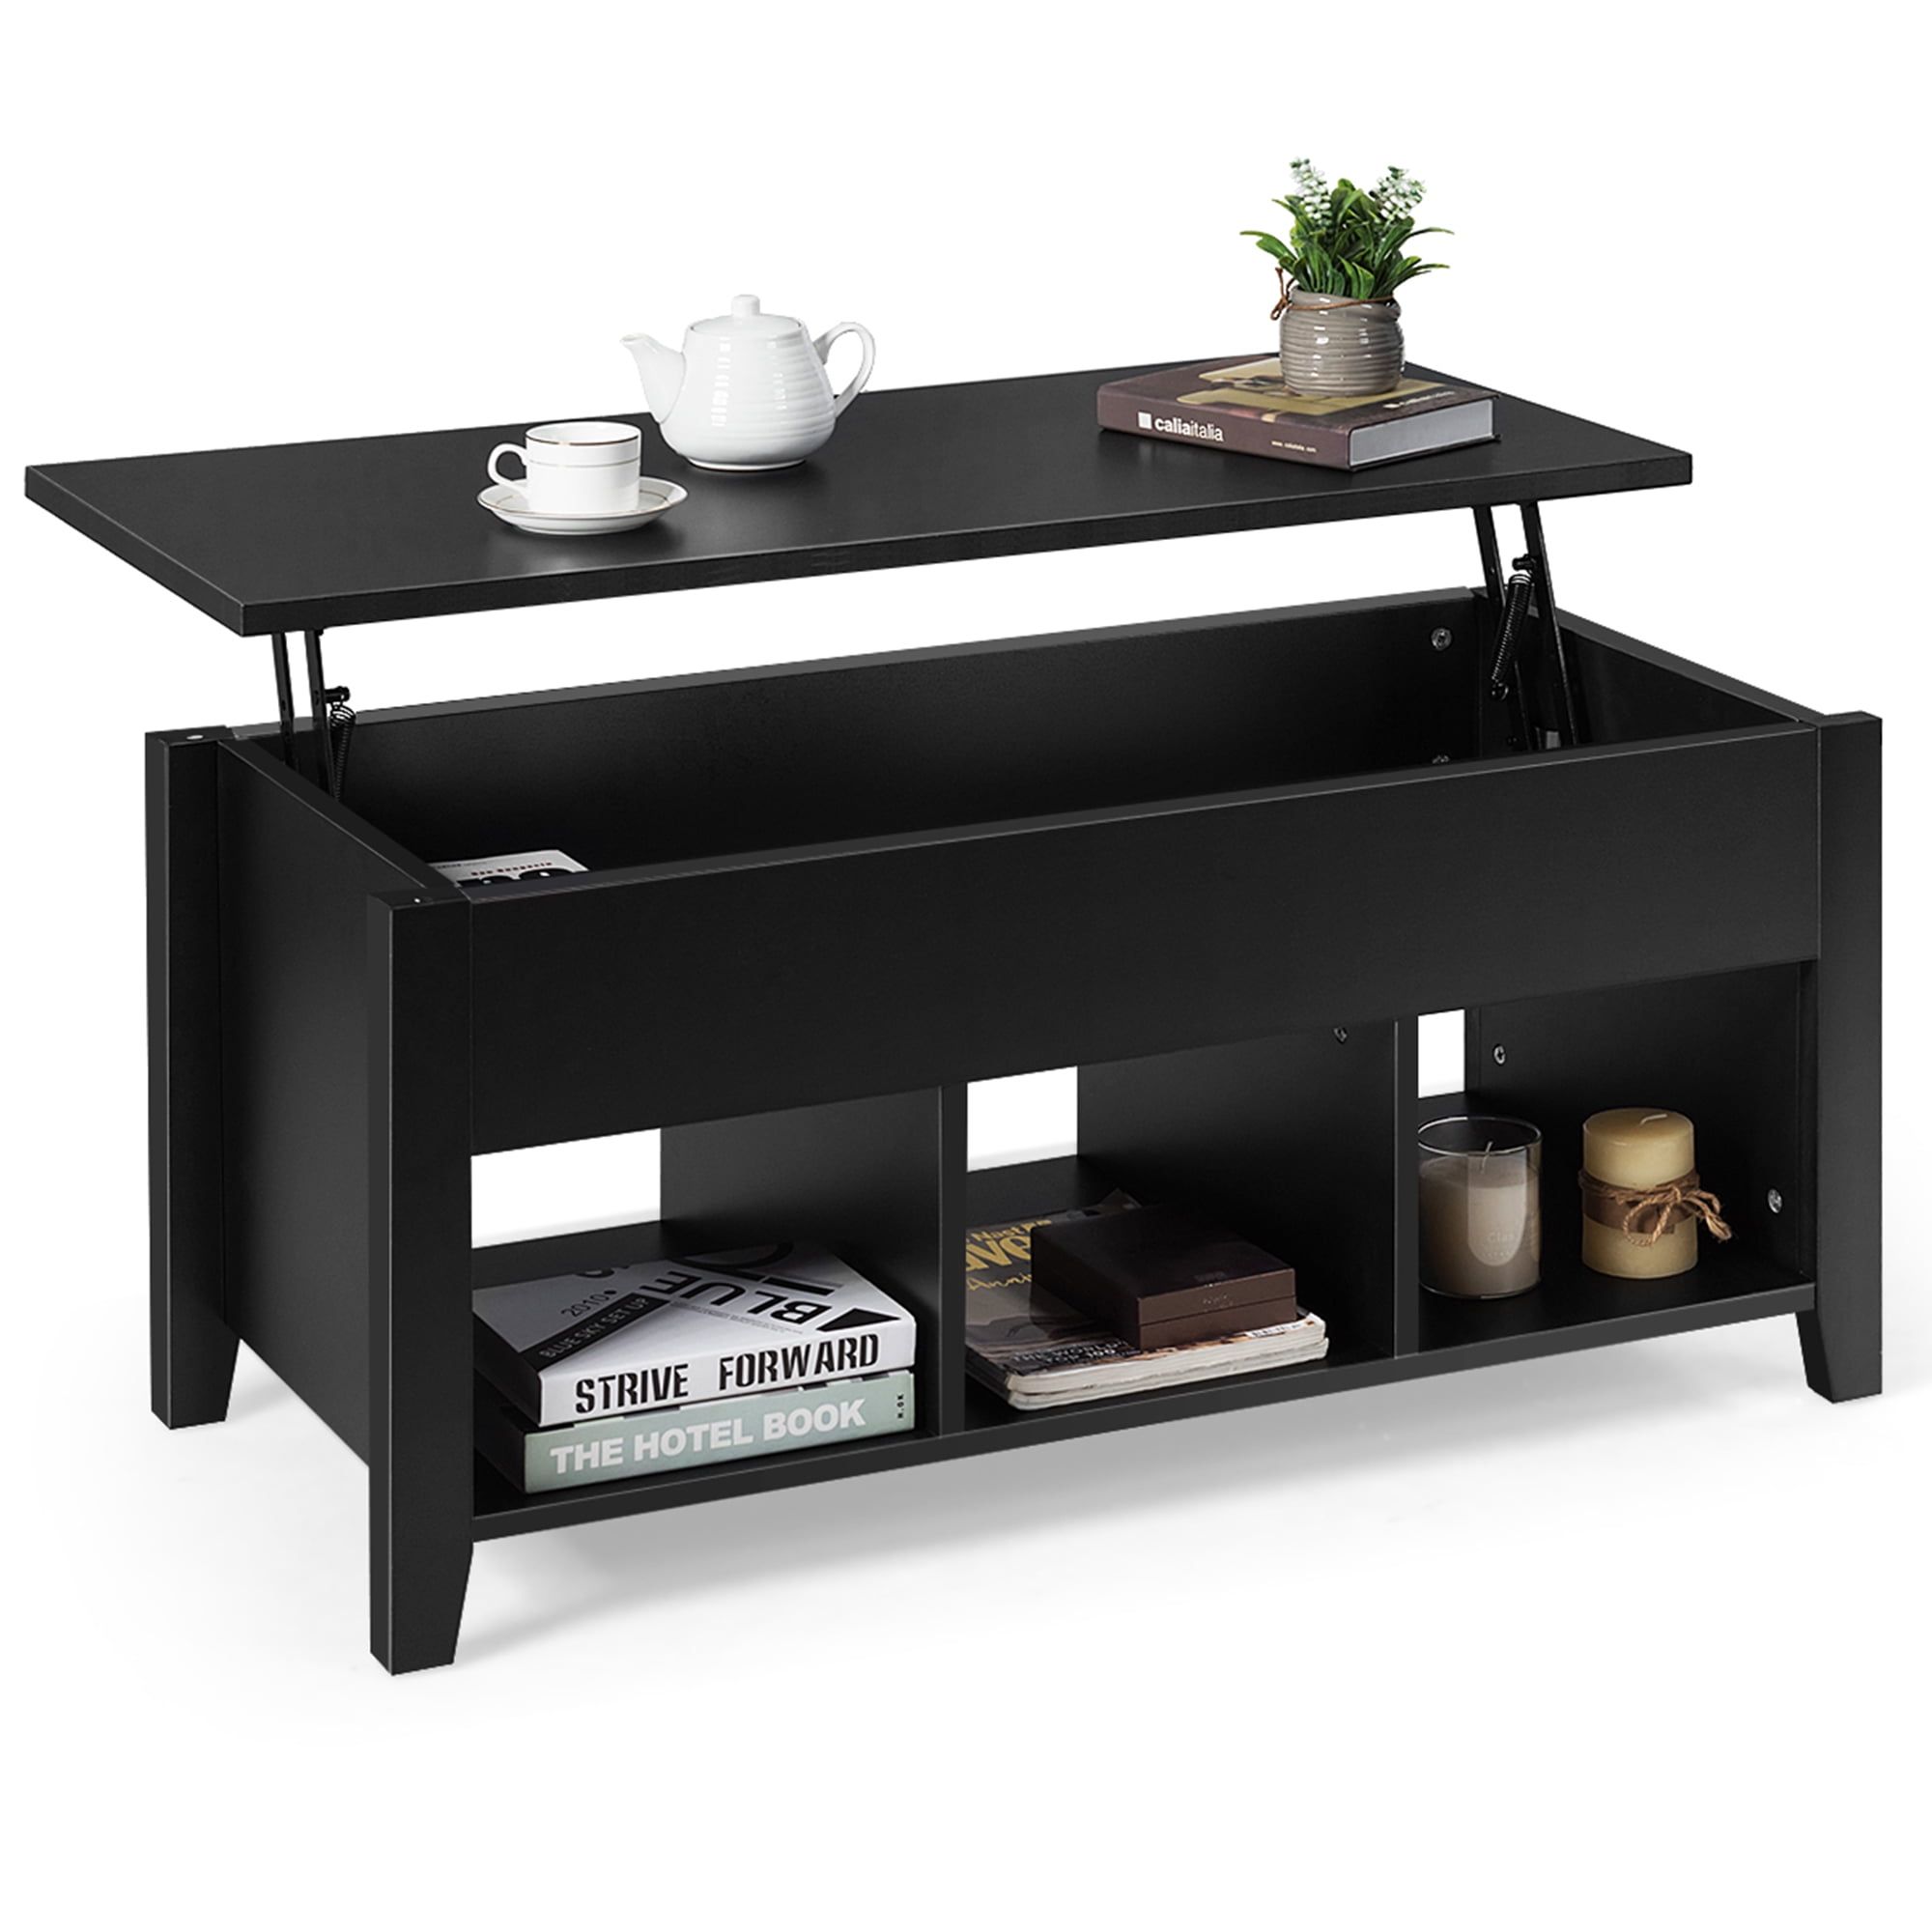 Gymax Lift Top Coffee Table W/ Storage Compartment Shelf Living Room Inside Lift Top Coffee Tables With Shelves (View 2 of 20)